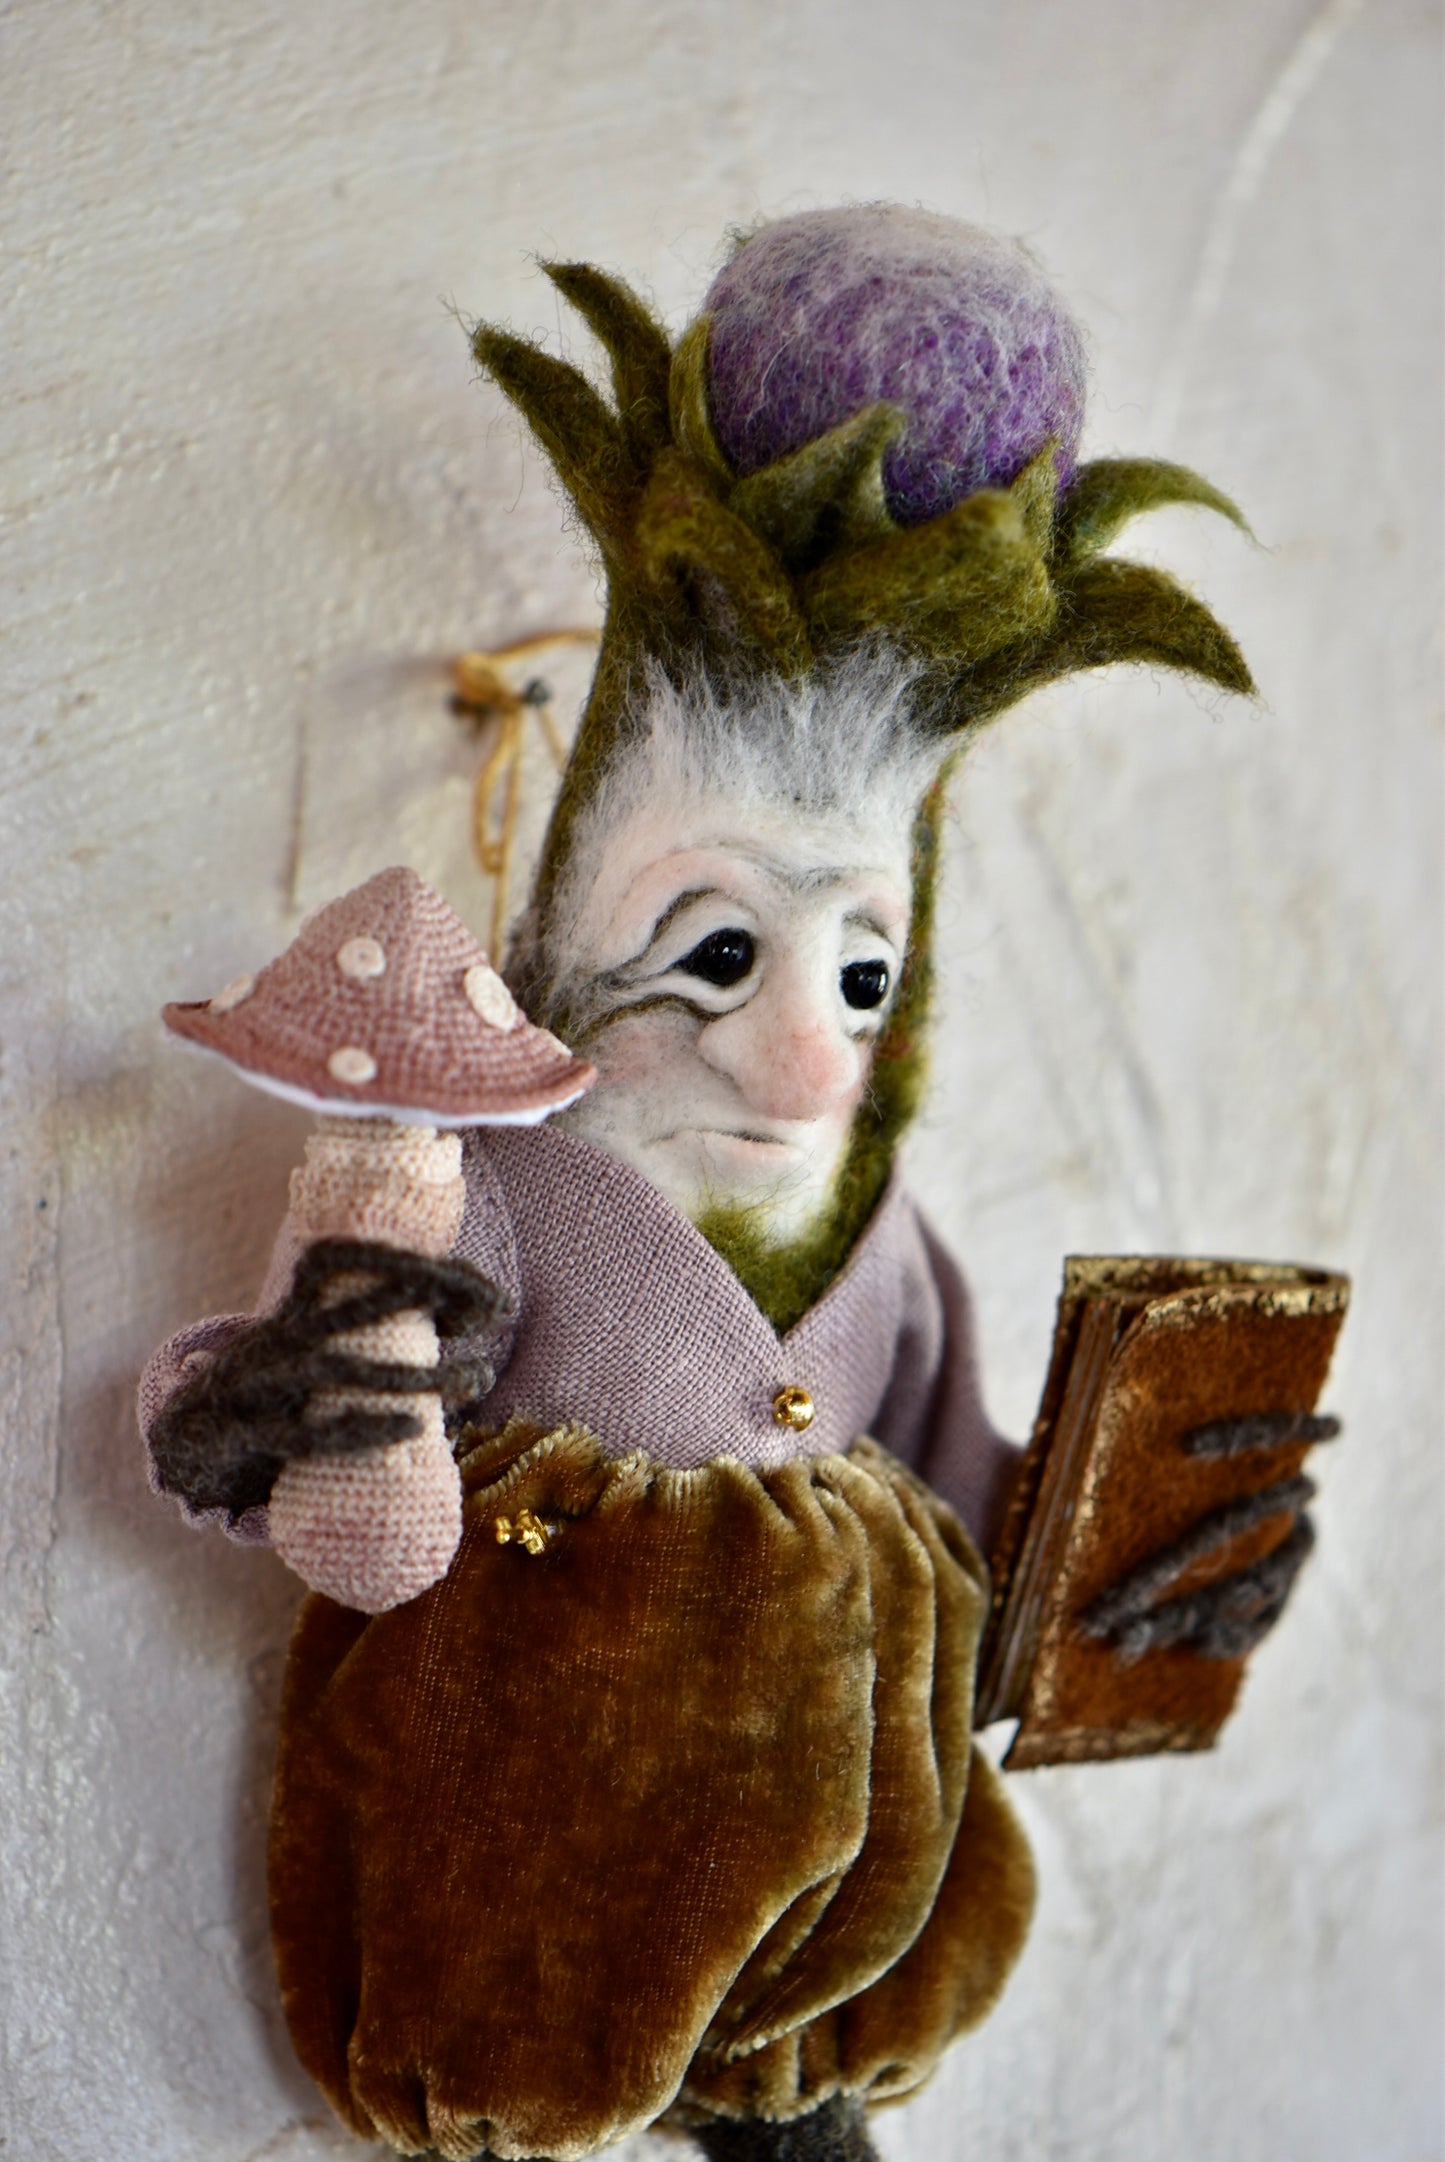 Magical Mandrake Creature - Collaboration with Tinybelloftheorairie and Harthicune